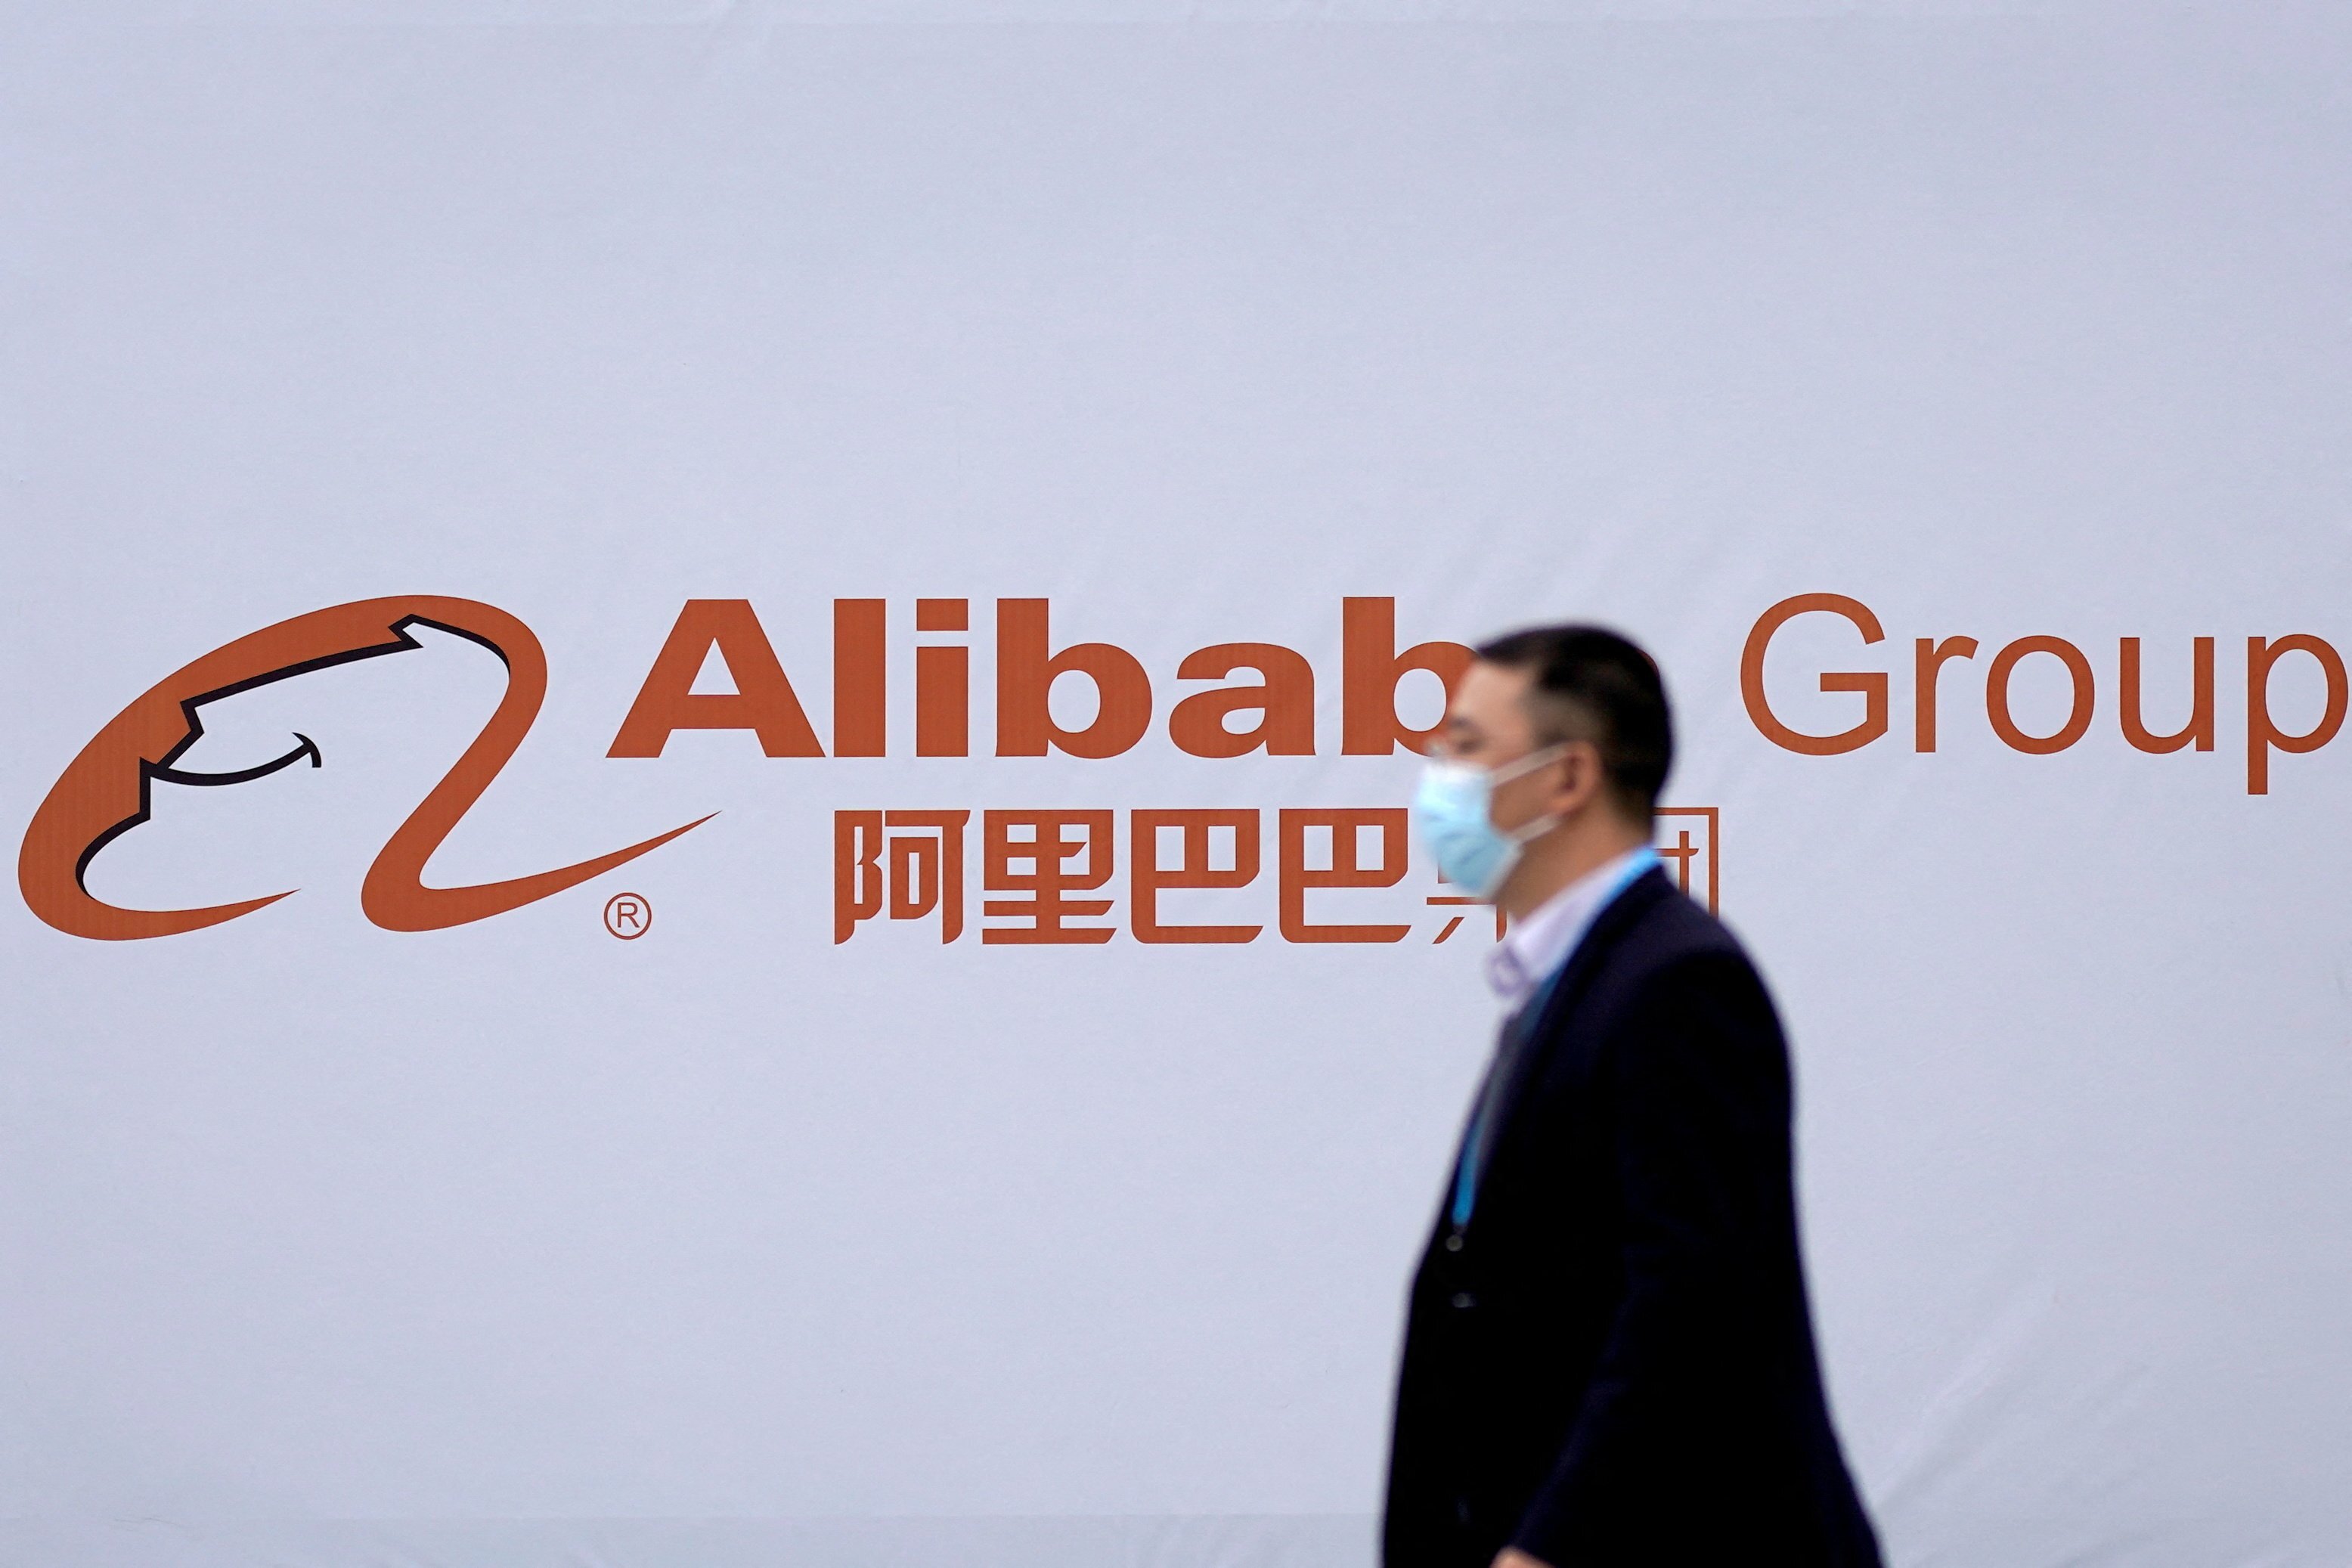 A logo of Alibaba Group is seen during the World Internet Conference (WIC) in Wuzhen, Zhejiang province, China, November 23, 2020. Photo: Reuters 